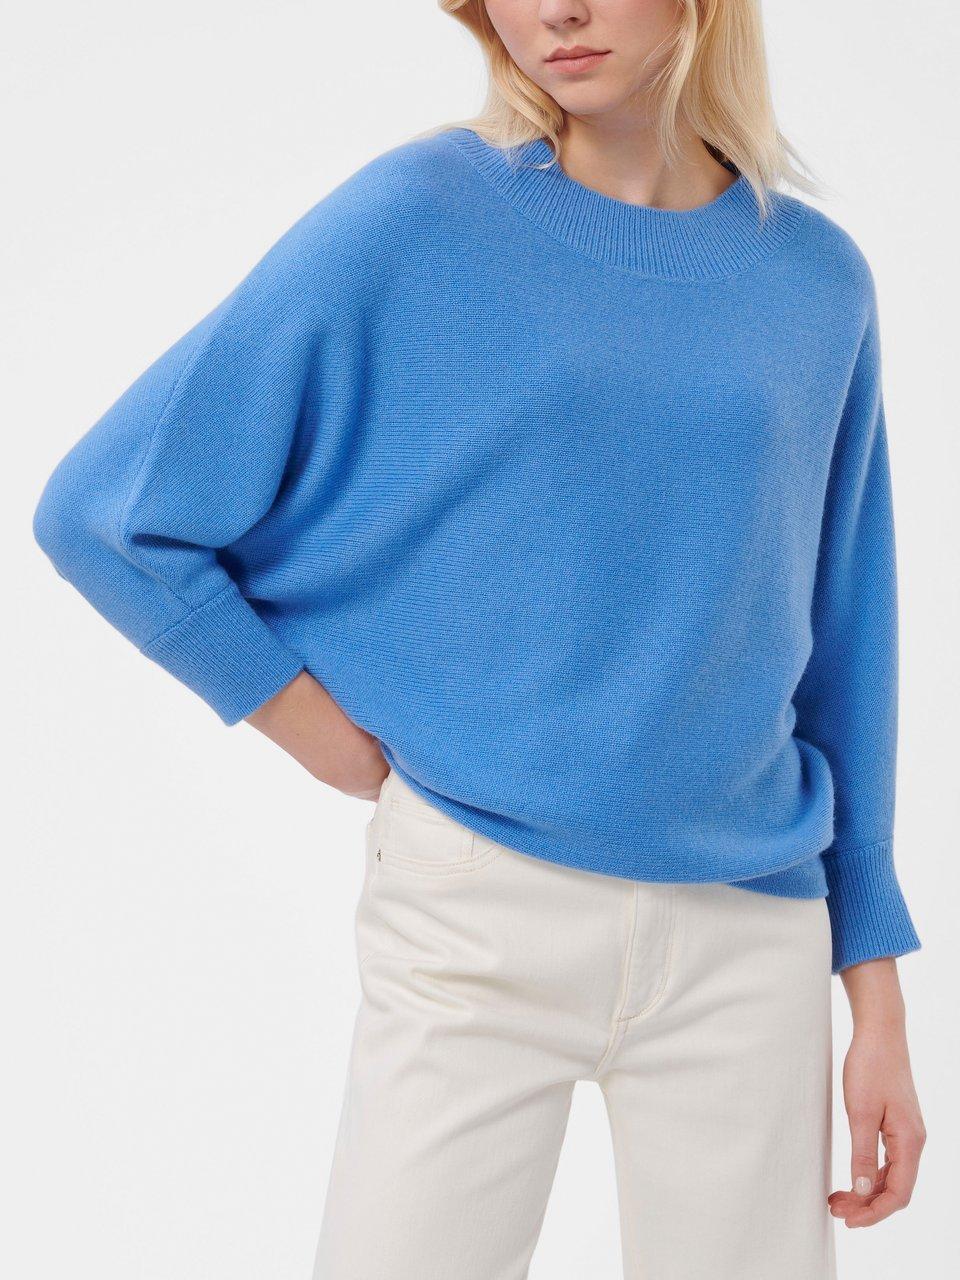 include - Le pull en 100% cachemire